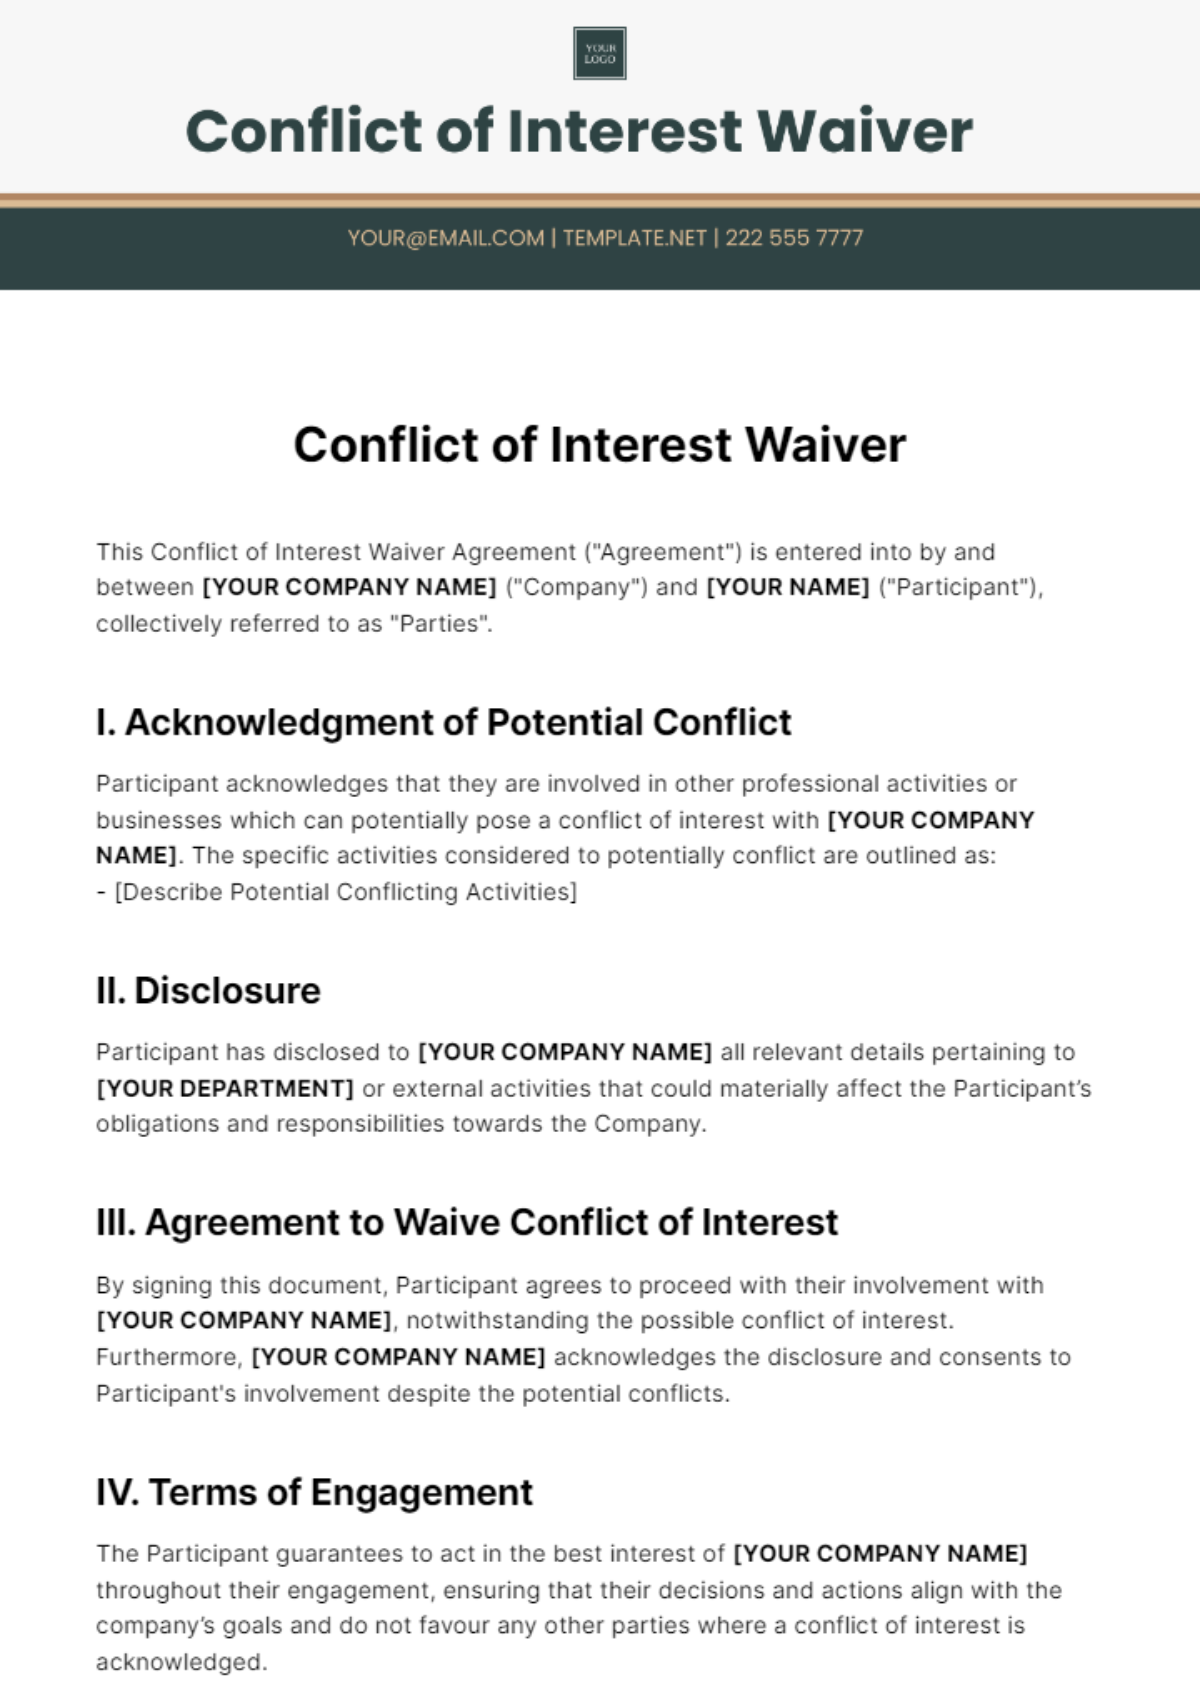 Free Conflict of Interest Waiver Template